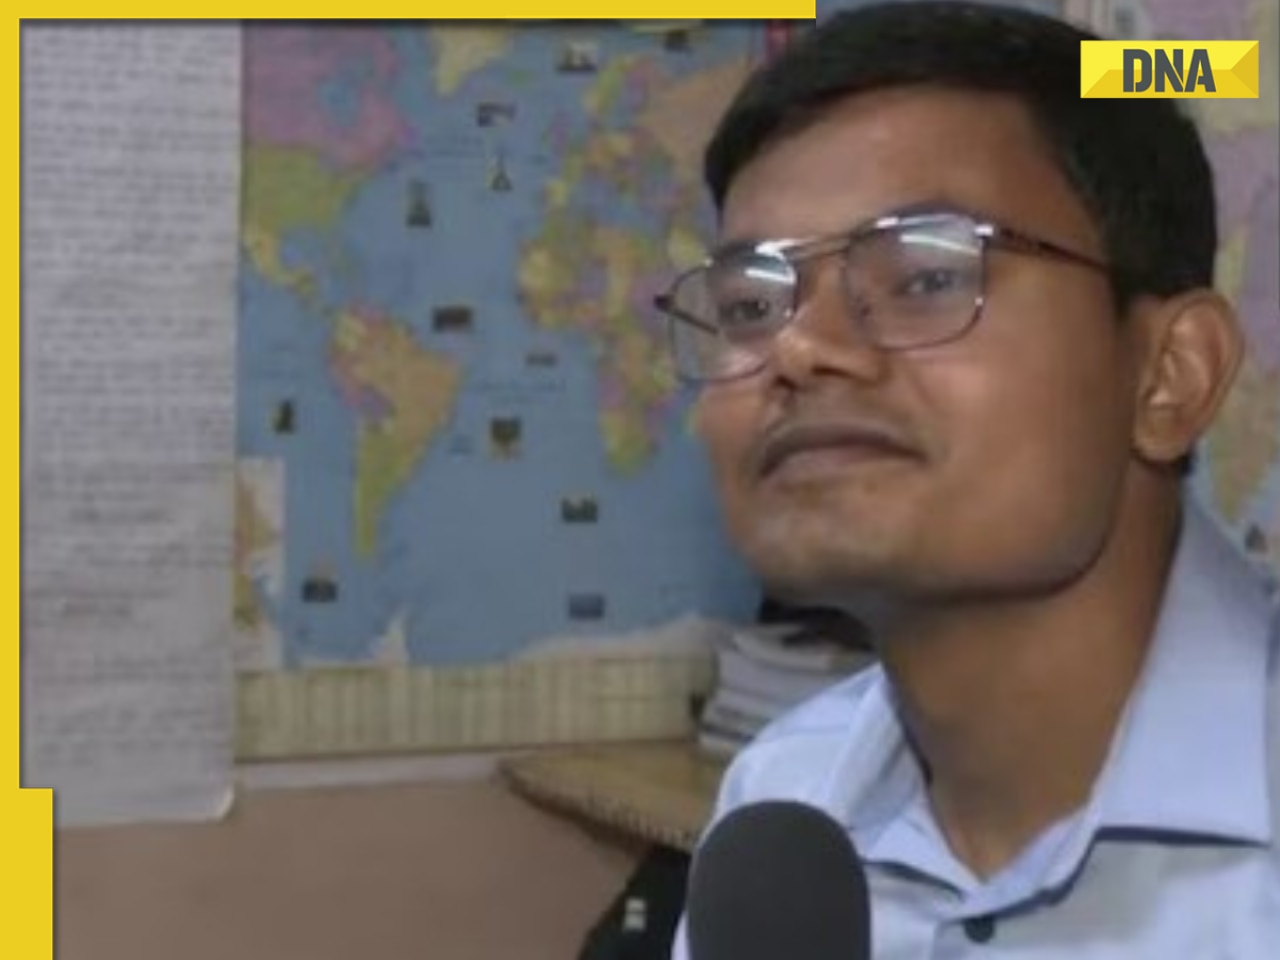 Meet farmer's son, who lived in mud house, cracked UPSC exam in third attempt, secured AIR...